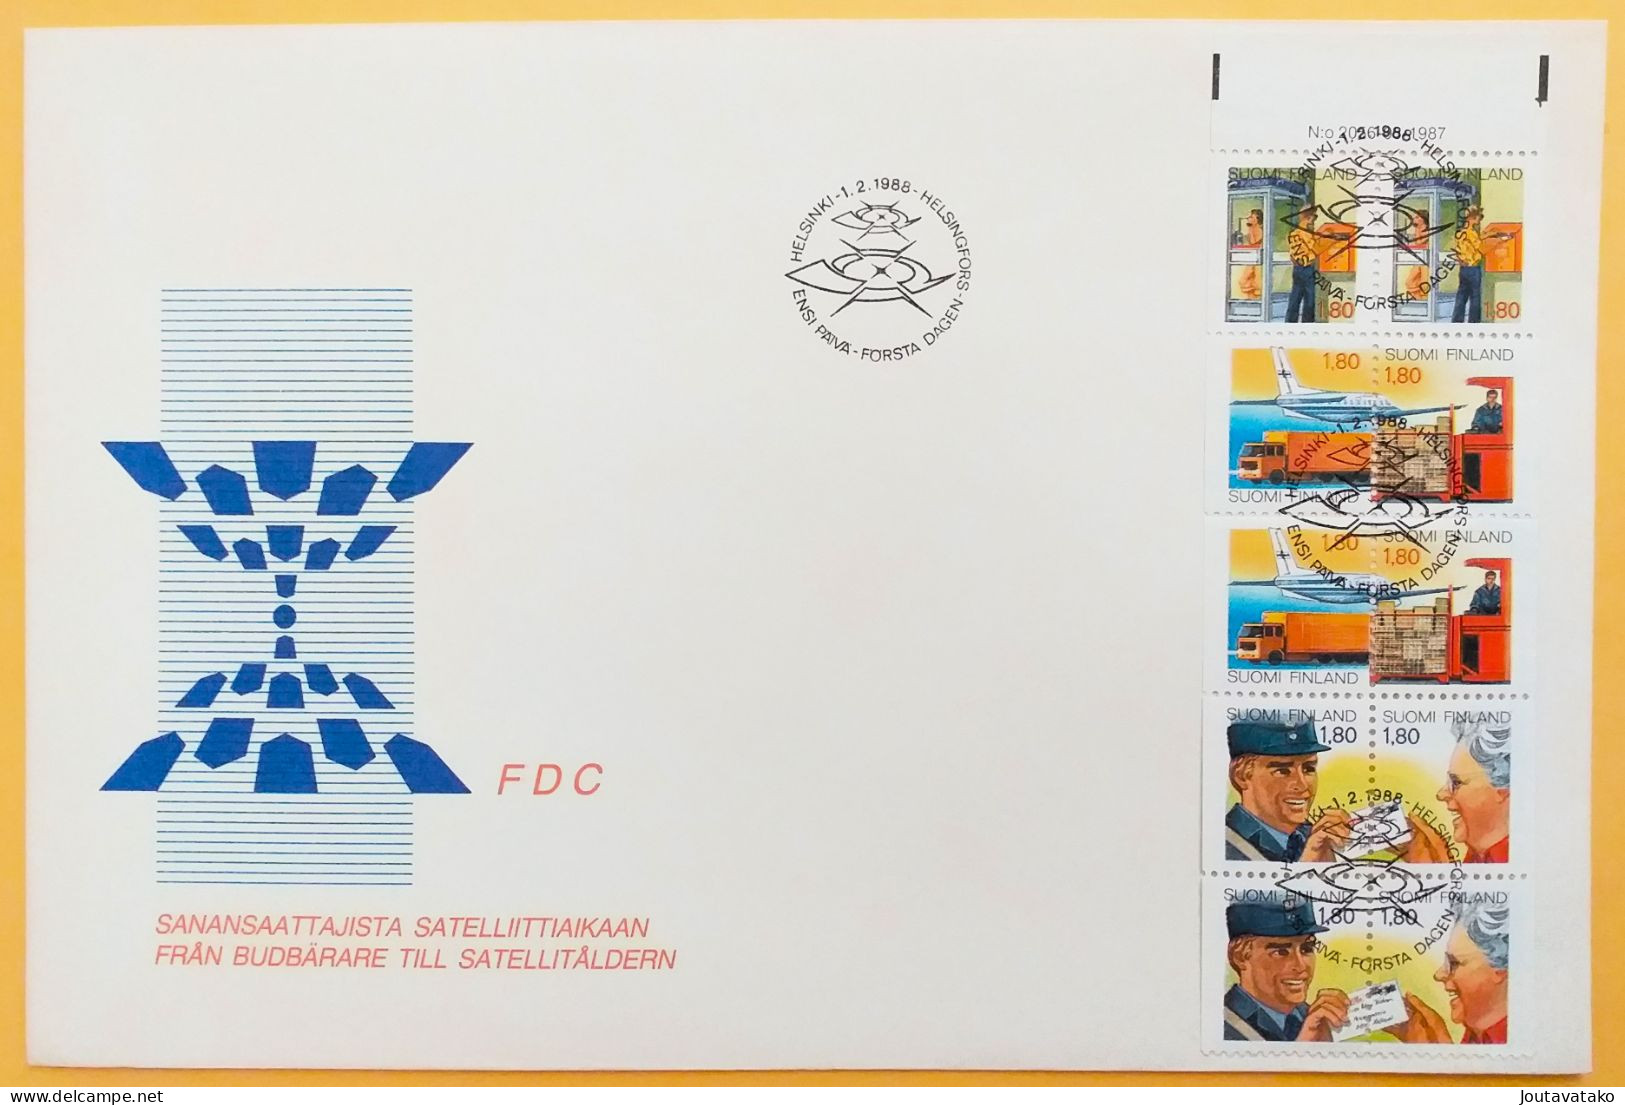 Finland FDC 1988 - Postal Service - Discount Stamp Booklet - MiNo Booklet 20 - FDC